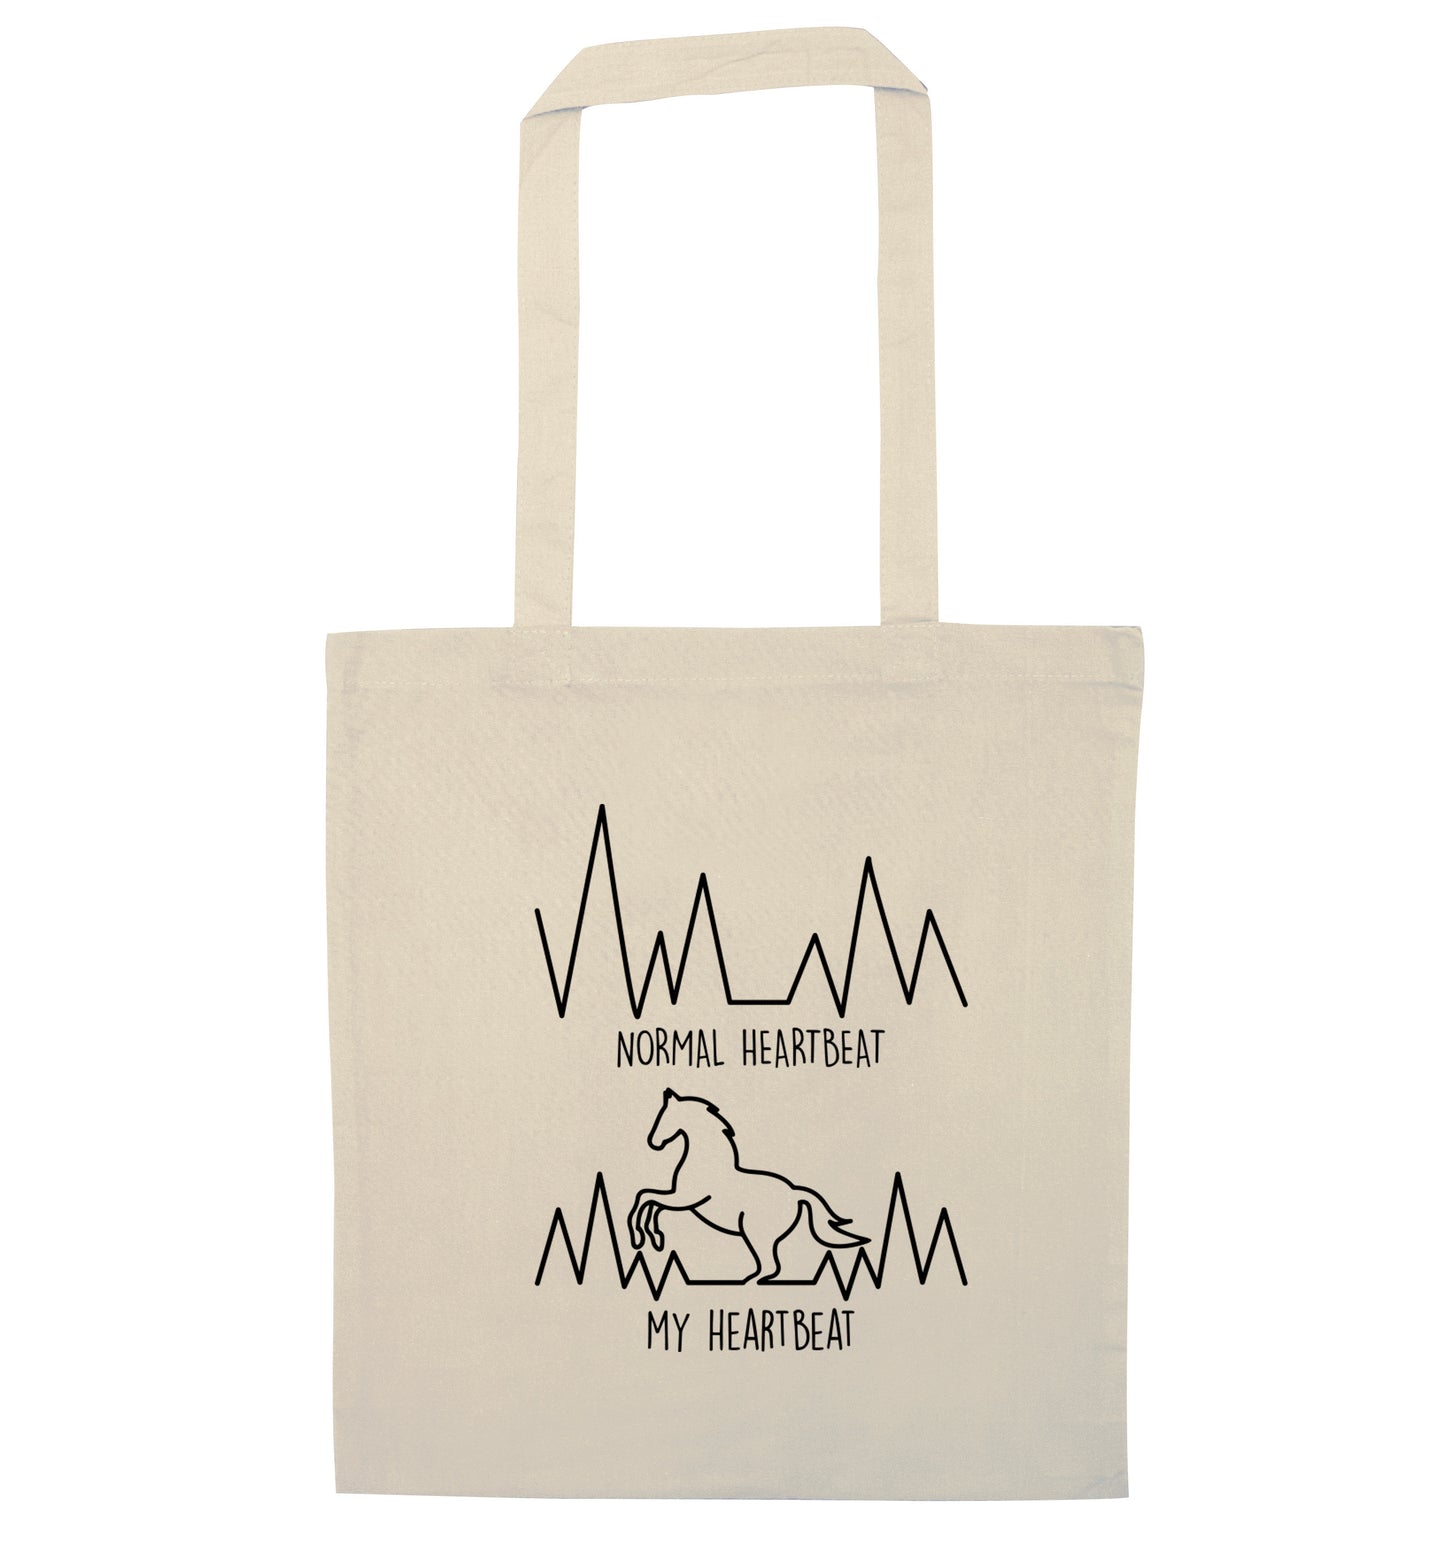 Normal heartbeat, my heartbeat horse lover natural tote bag